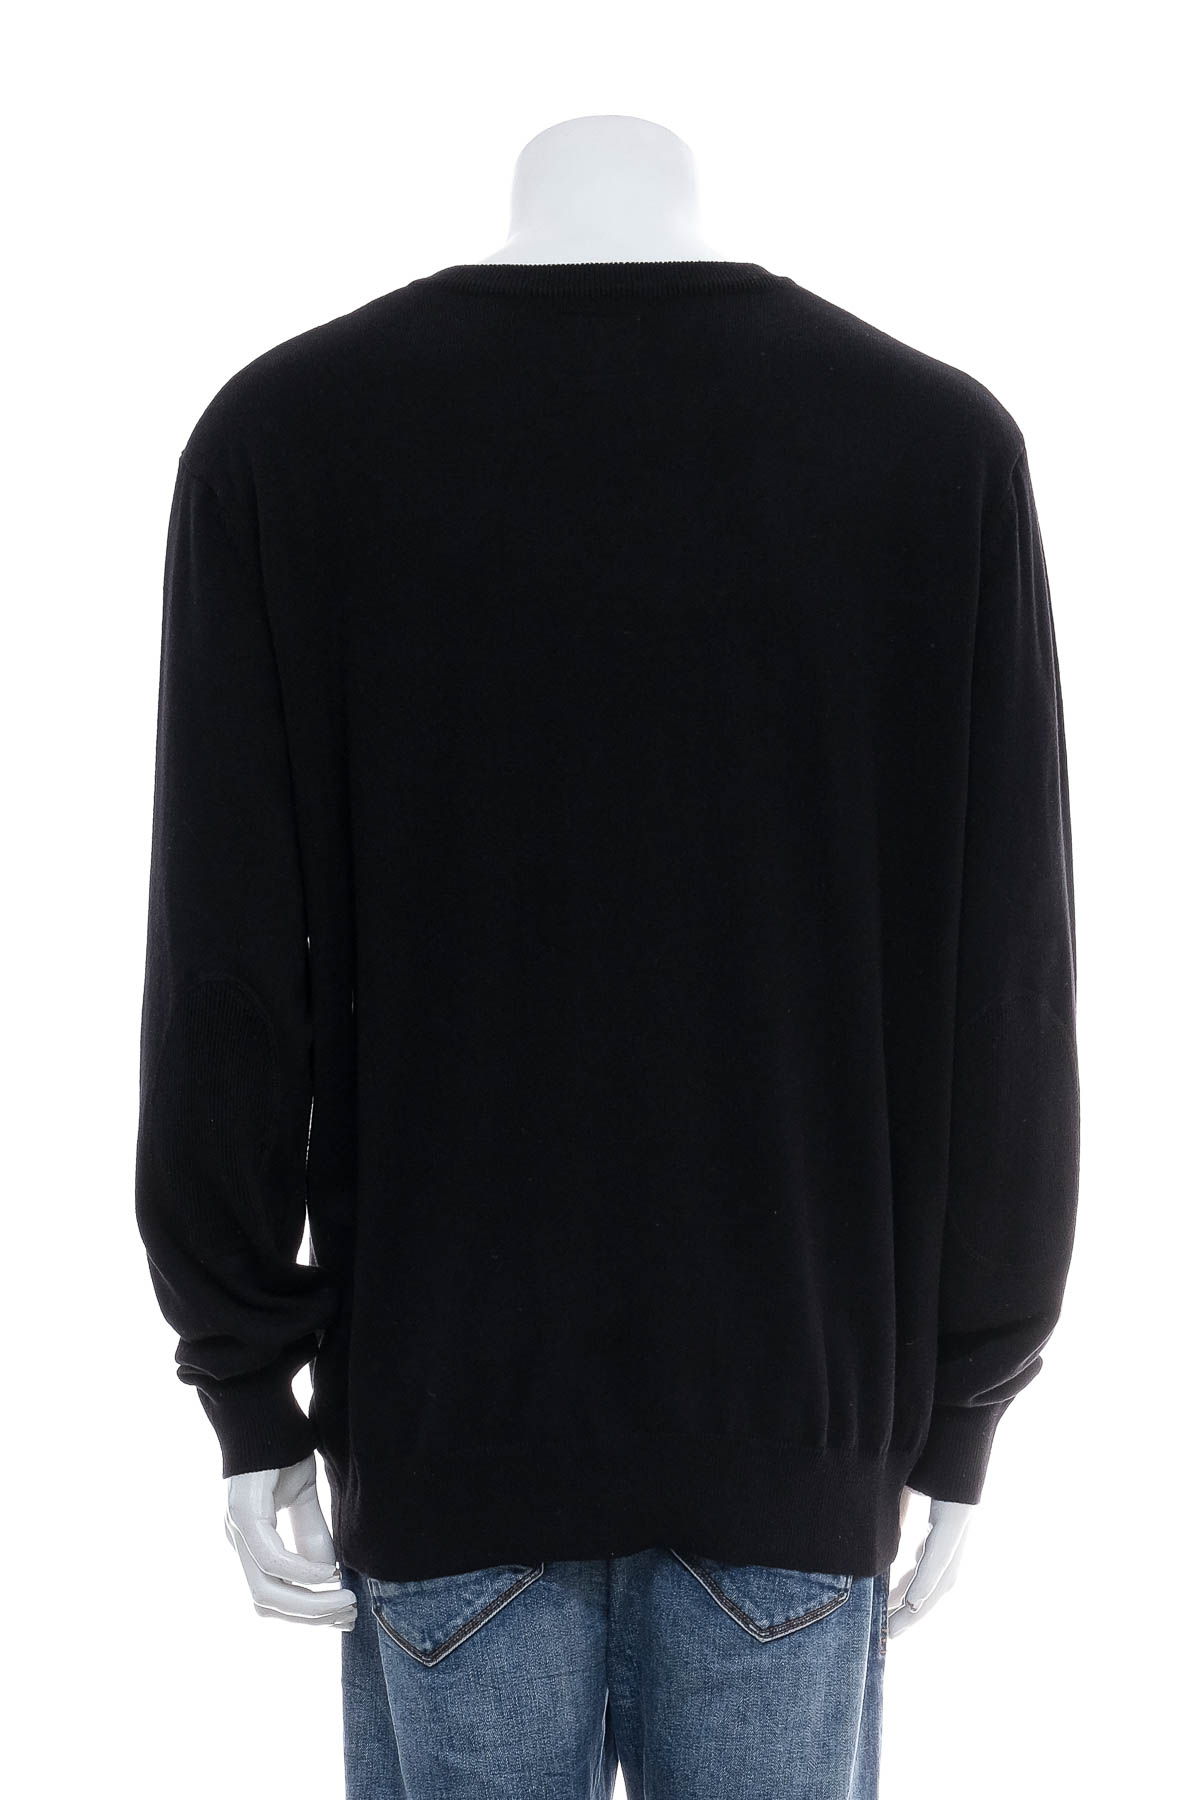 Men's sweater - Luciano - 1